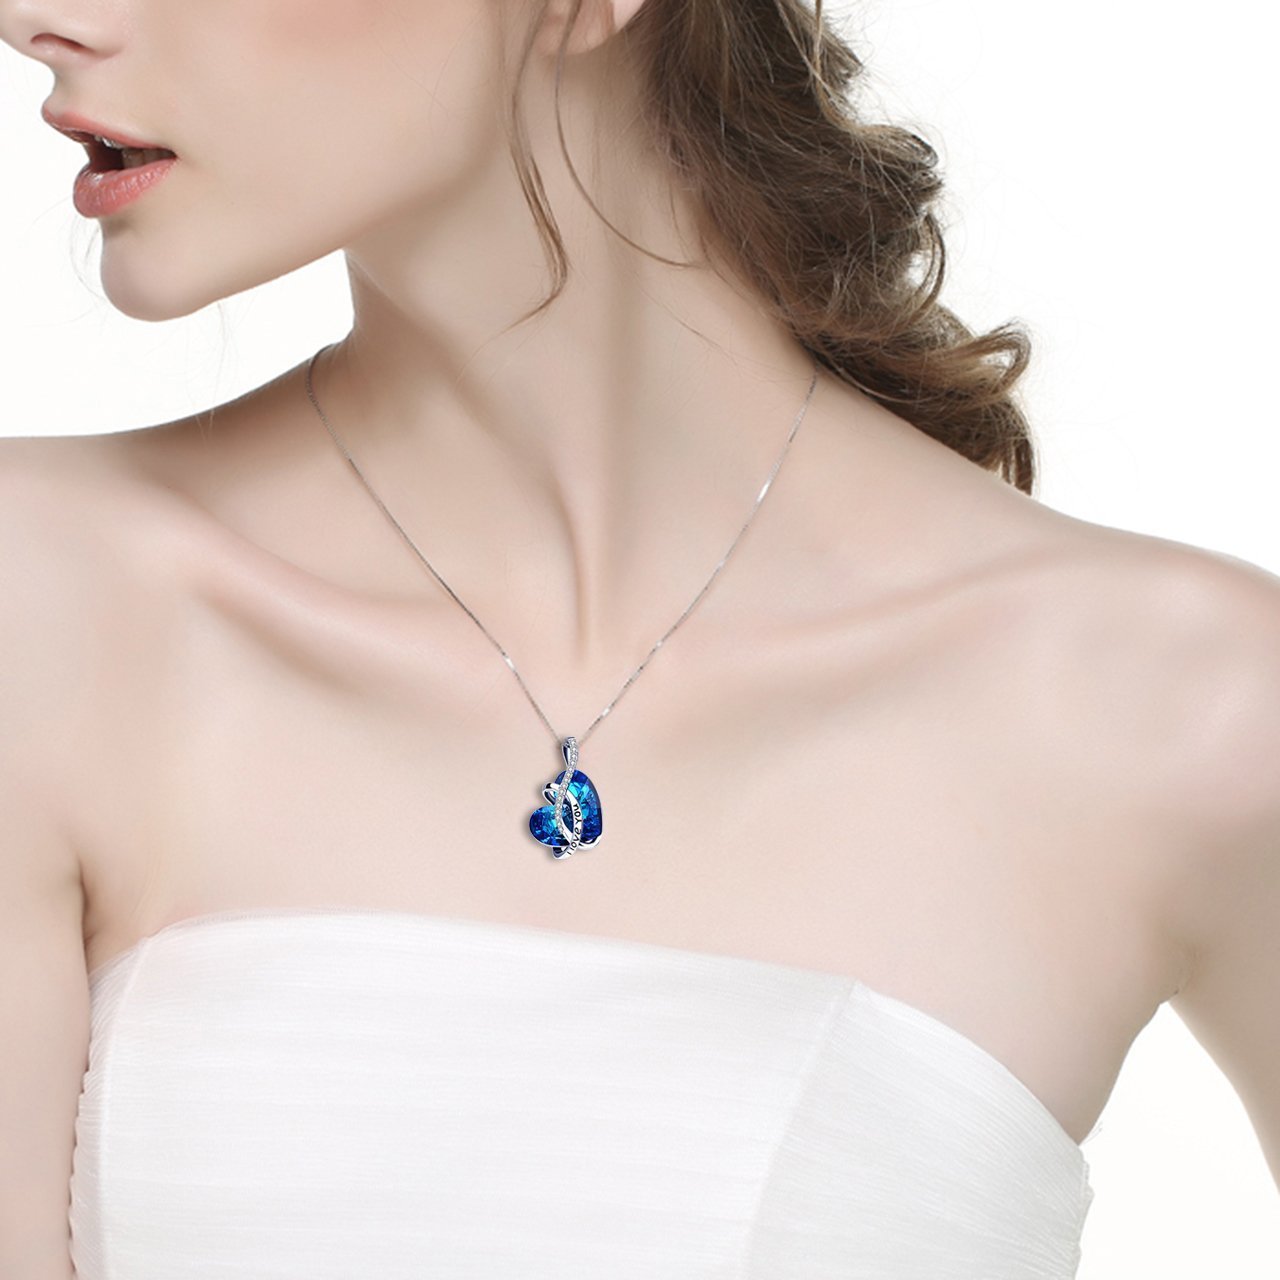 Bermuda Blue  Elements "I Love You Necklace" in 18K White Gold